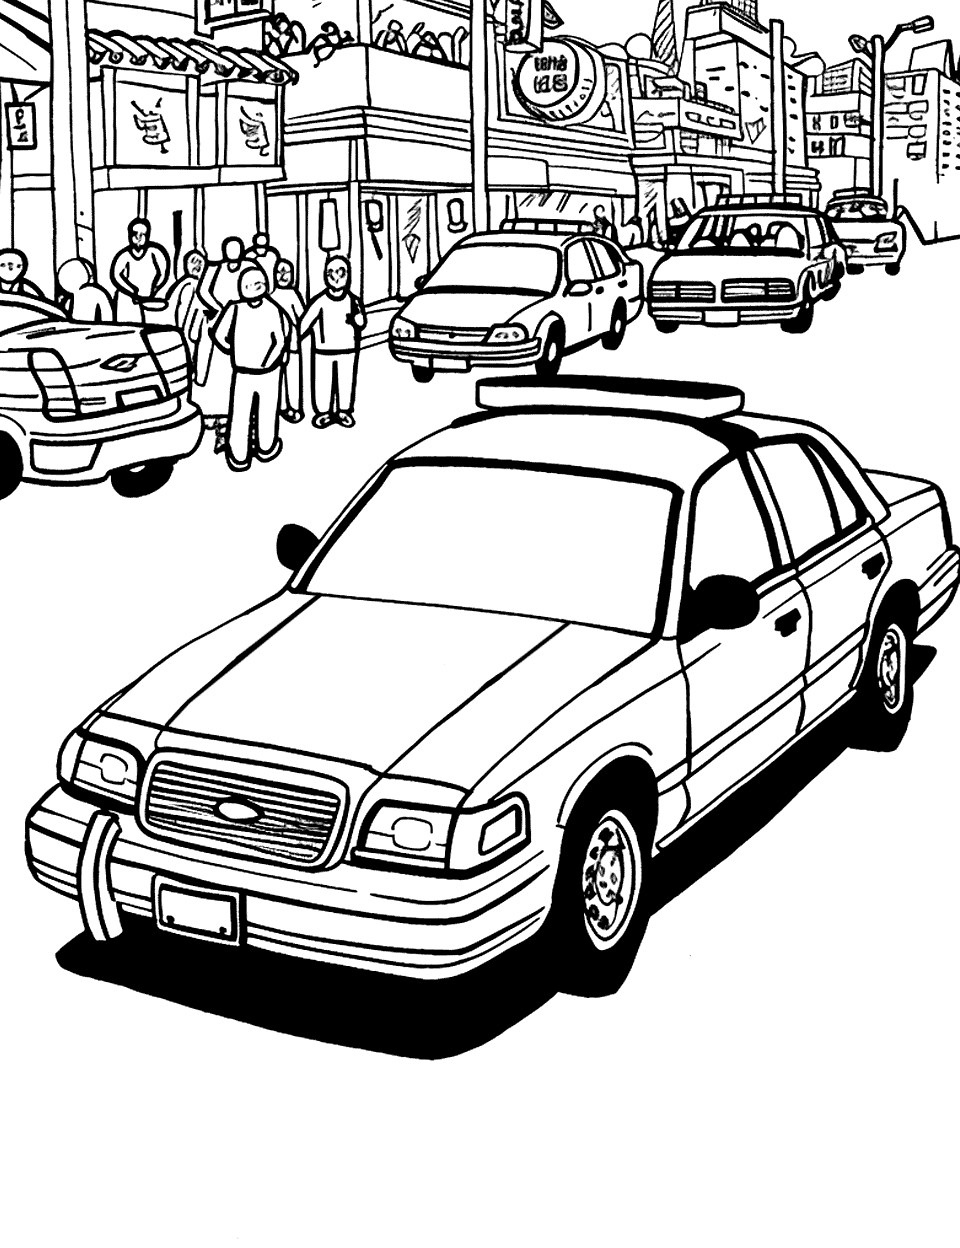 Undercover Cop Car Police Coloring Page - A nondescript police car on surveillance duty in a crowded area.